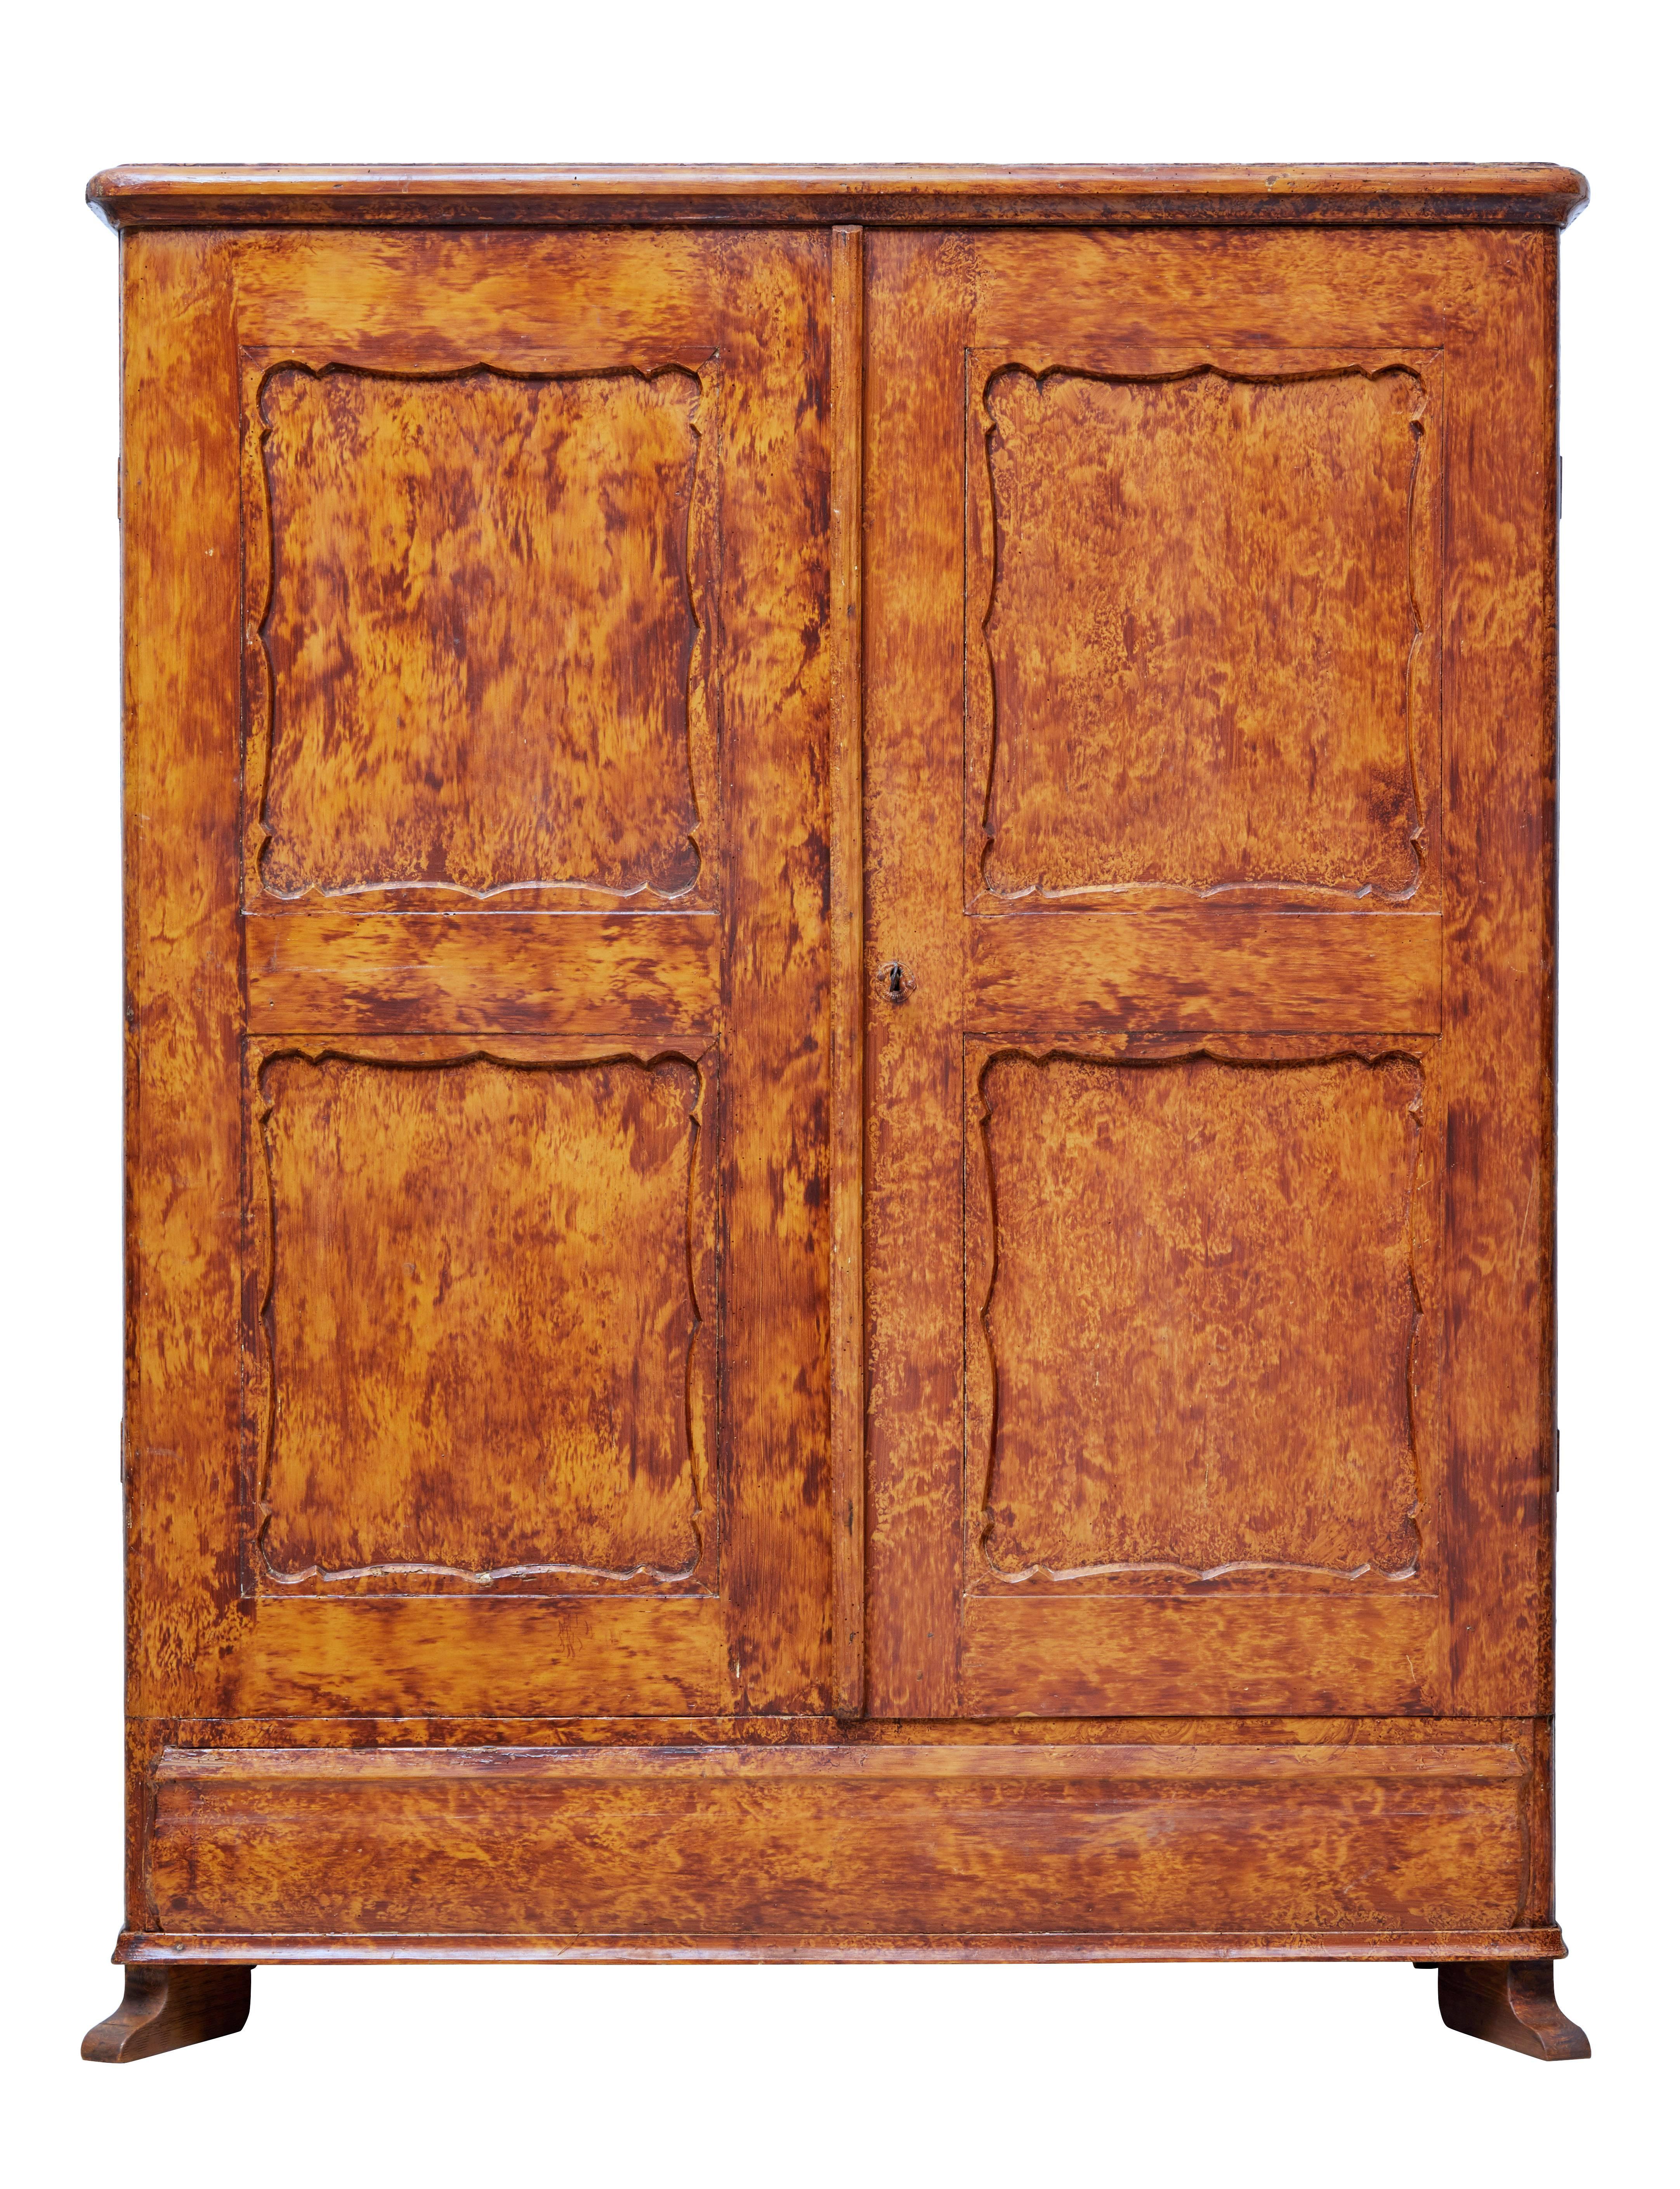 Good quality traditional Swedish cupboard, circa 1870.

Presented in its original ragwork paint effect. Double doors open to reveal a partially fitted interior which indicates this was being used as a wardrobe.

Two shelves and four drawers,